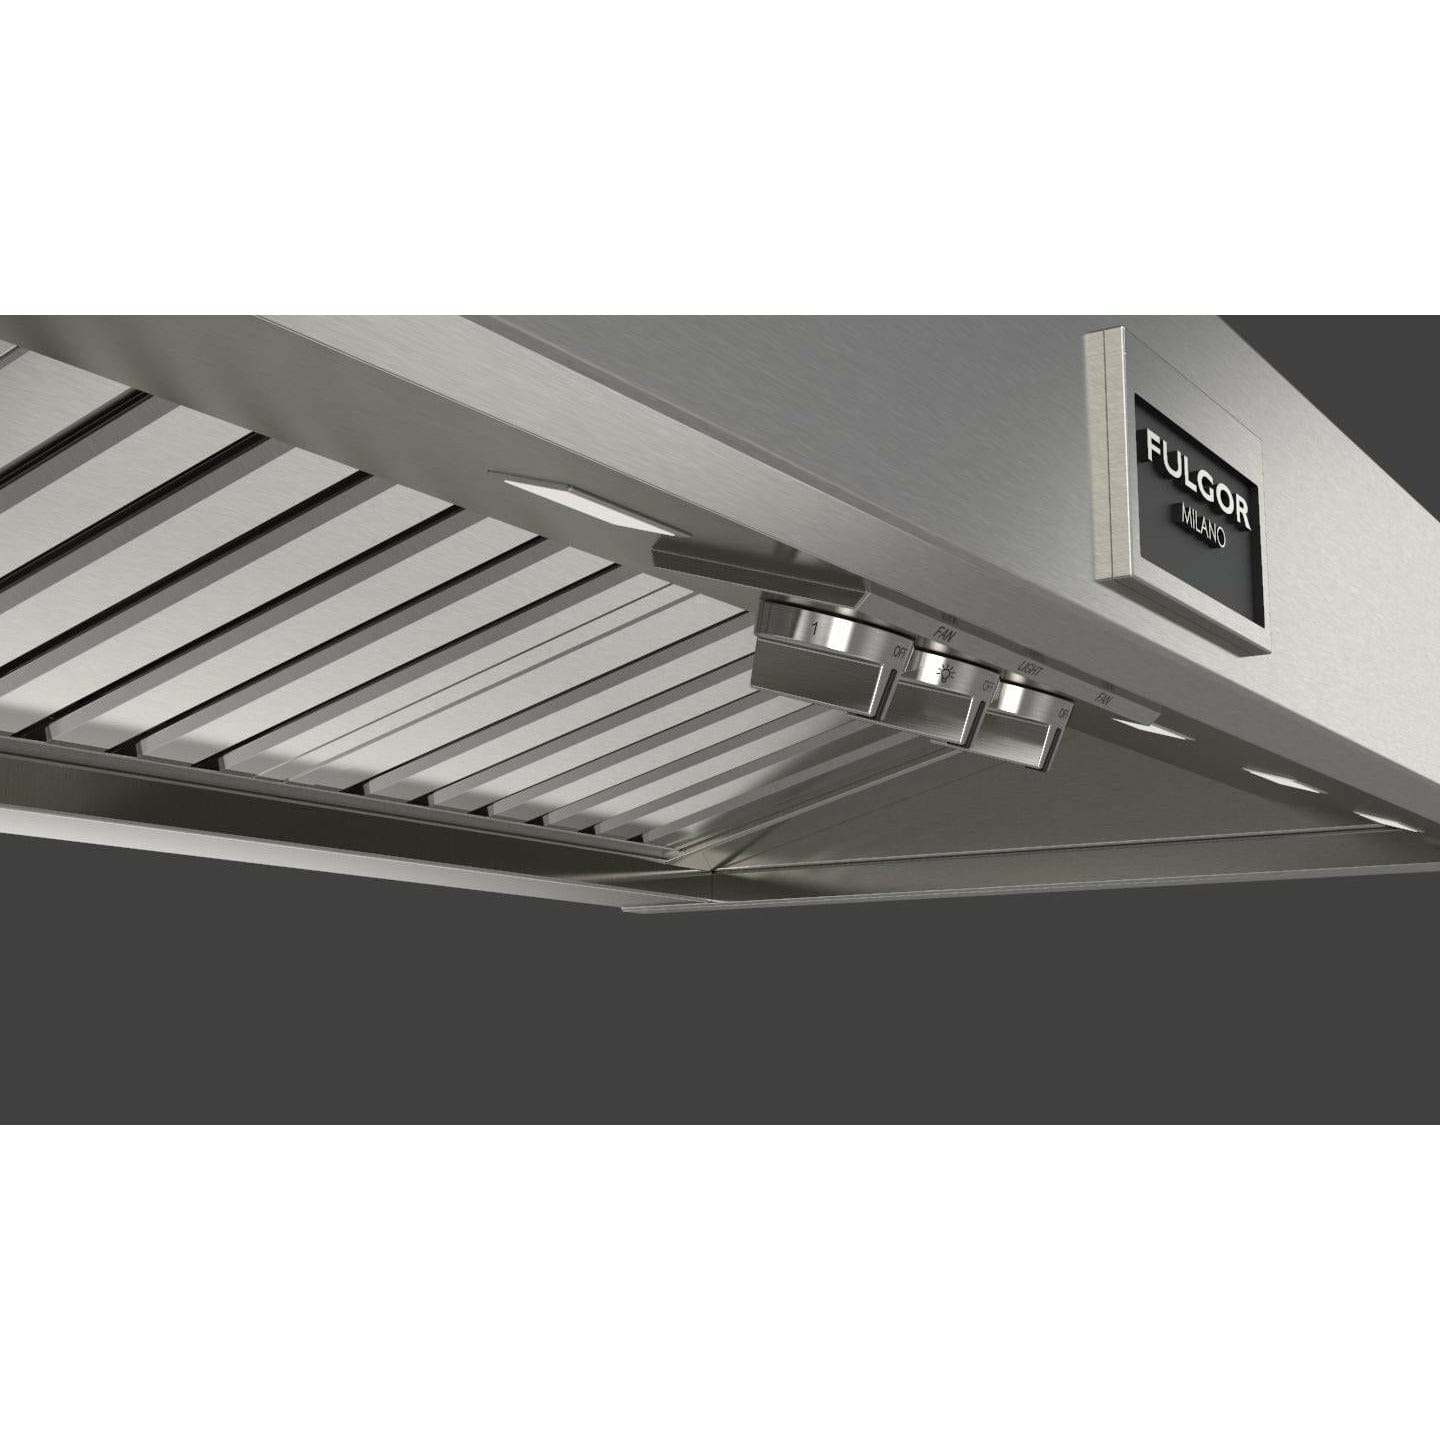 Fulgor Milano 48" Professional Wall Range Hood with Baffle Filters, Stainless Steel - F6PH48DS1 Hoods F6PH48DS1 Luxury Appliances Direct